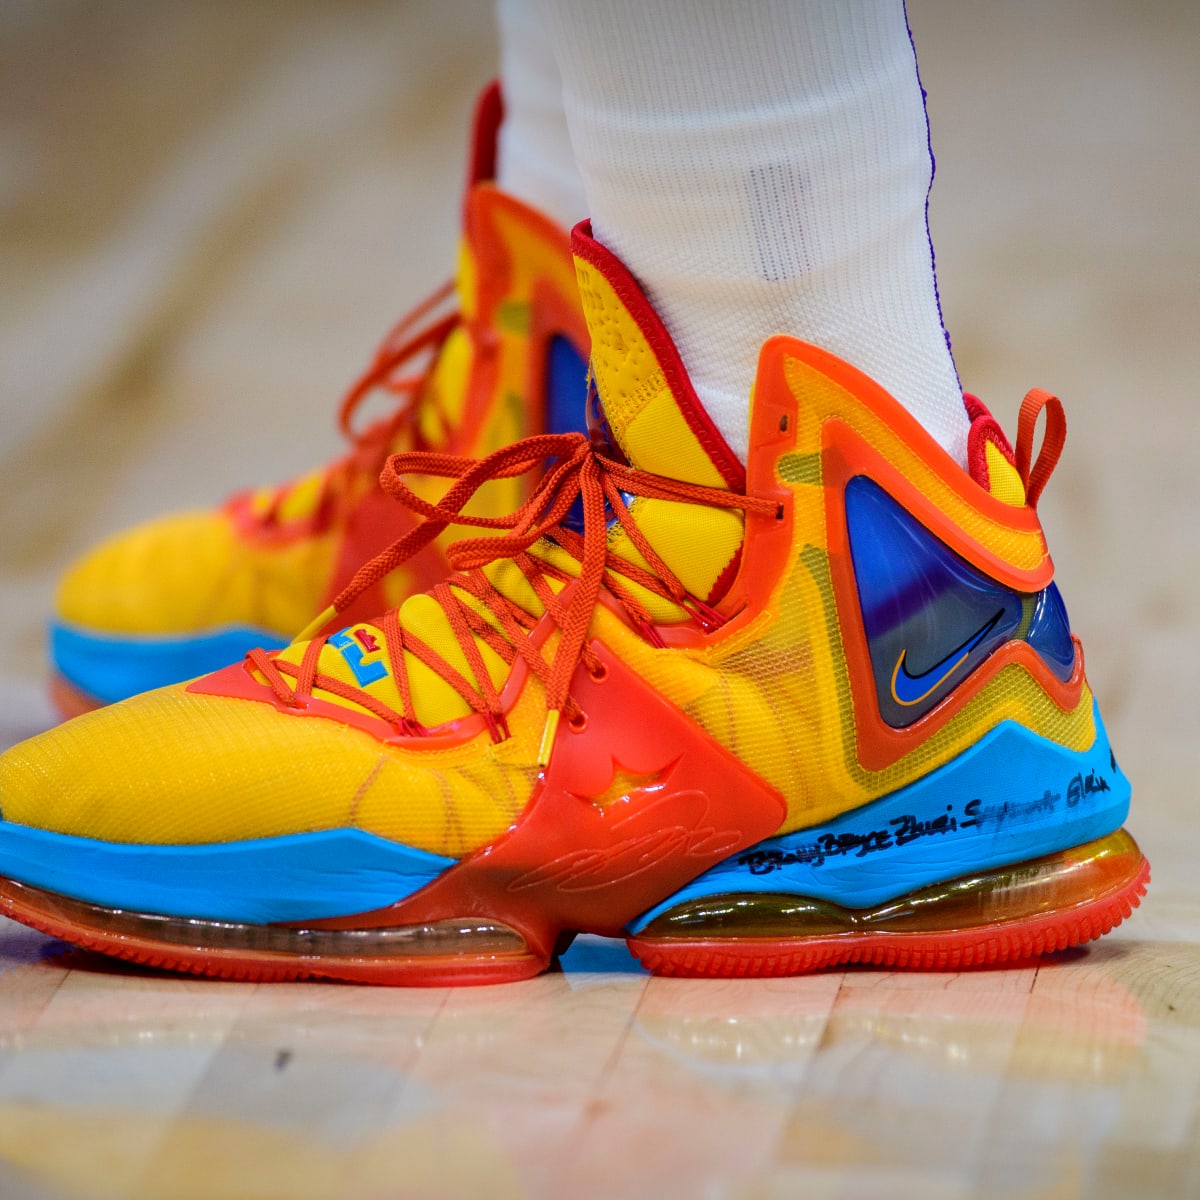 LeBron James Debuts Unreleased Shoes on Birthday